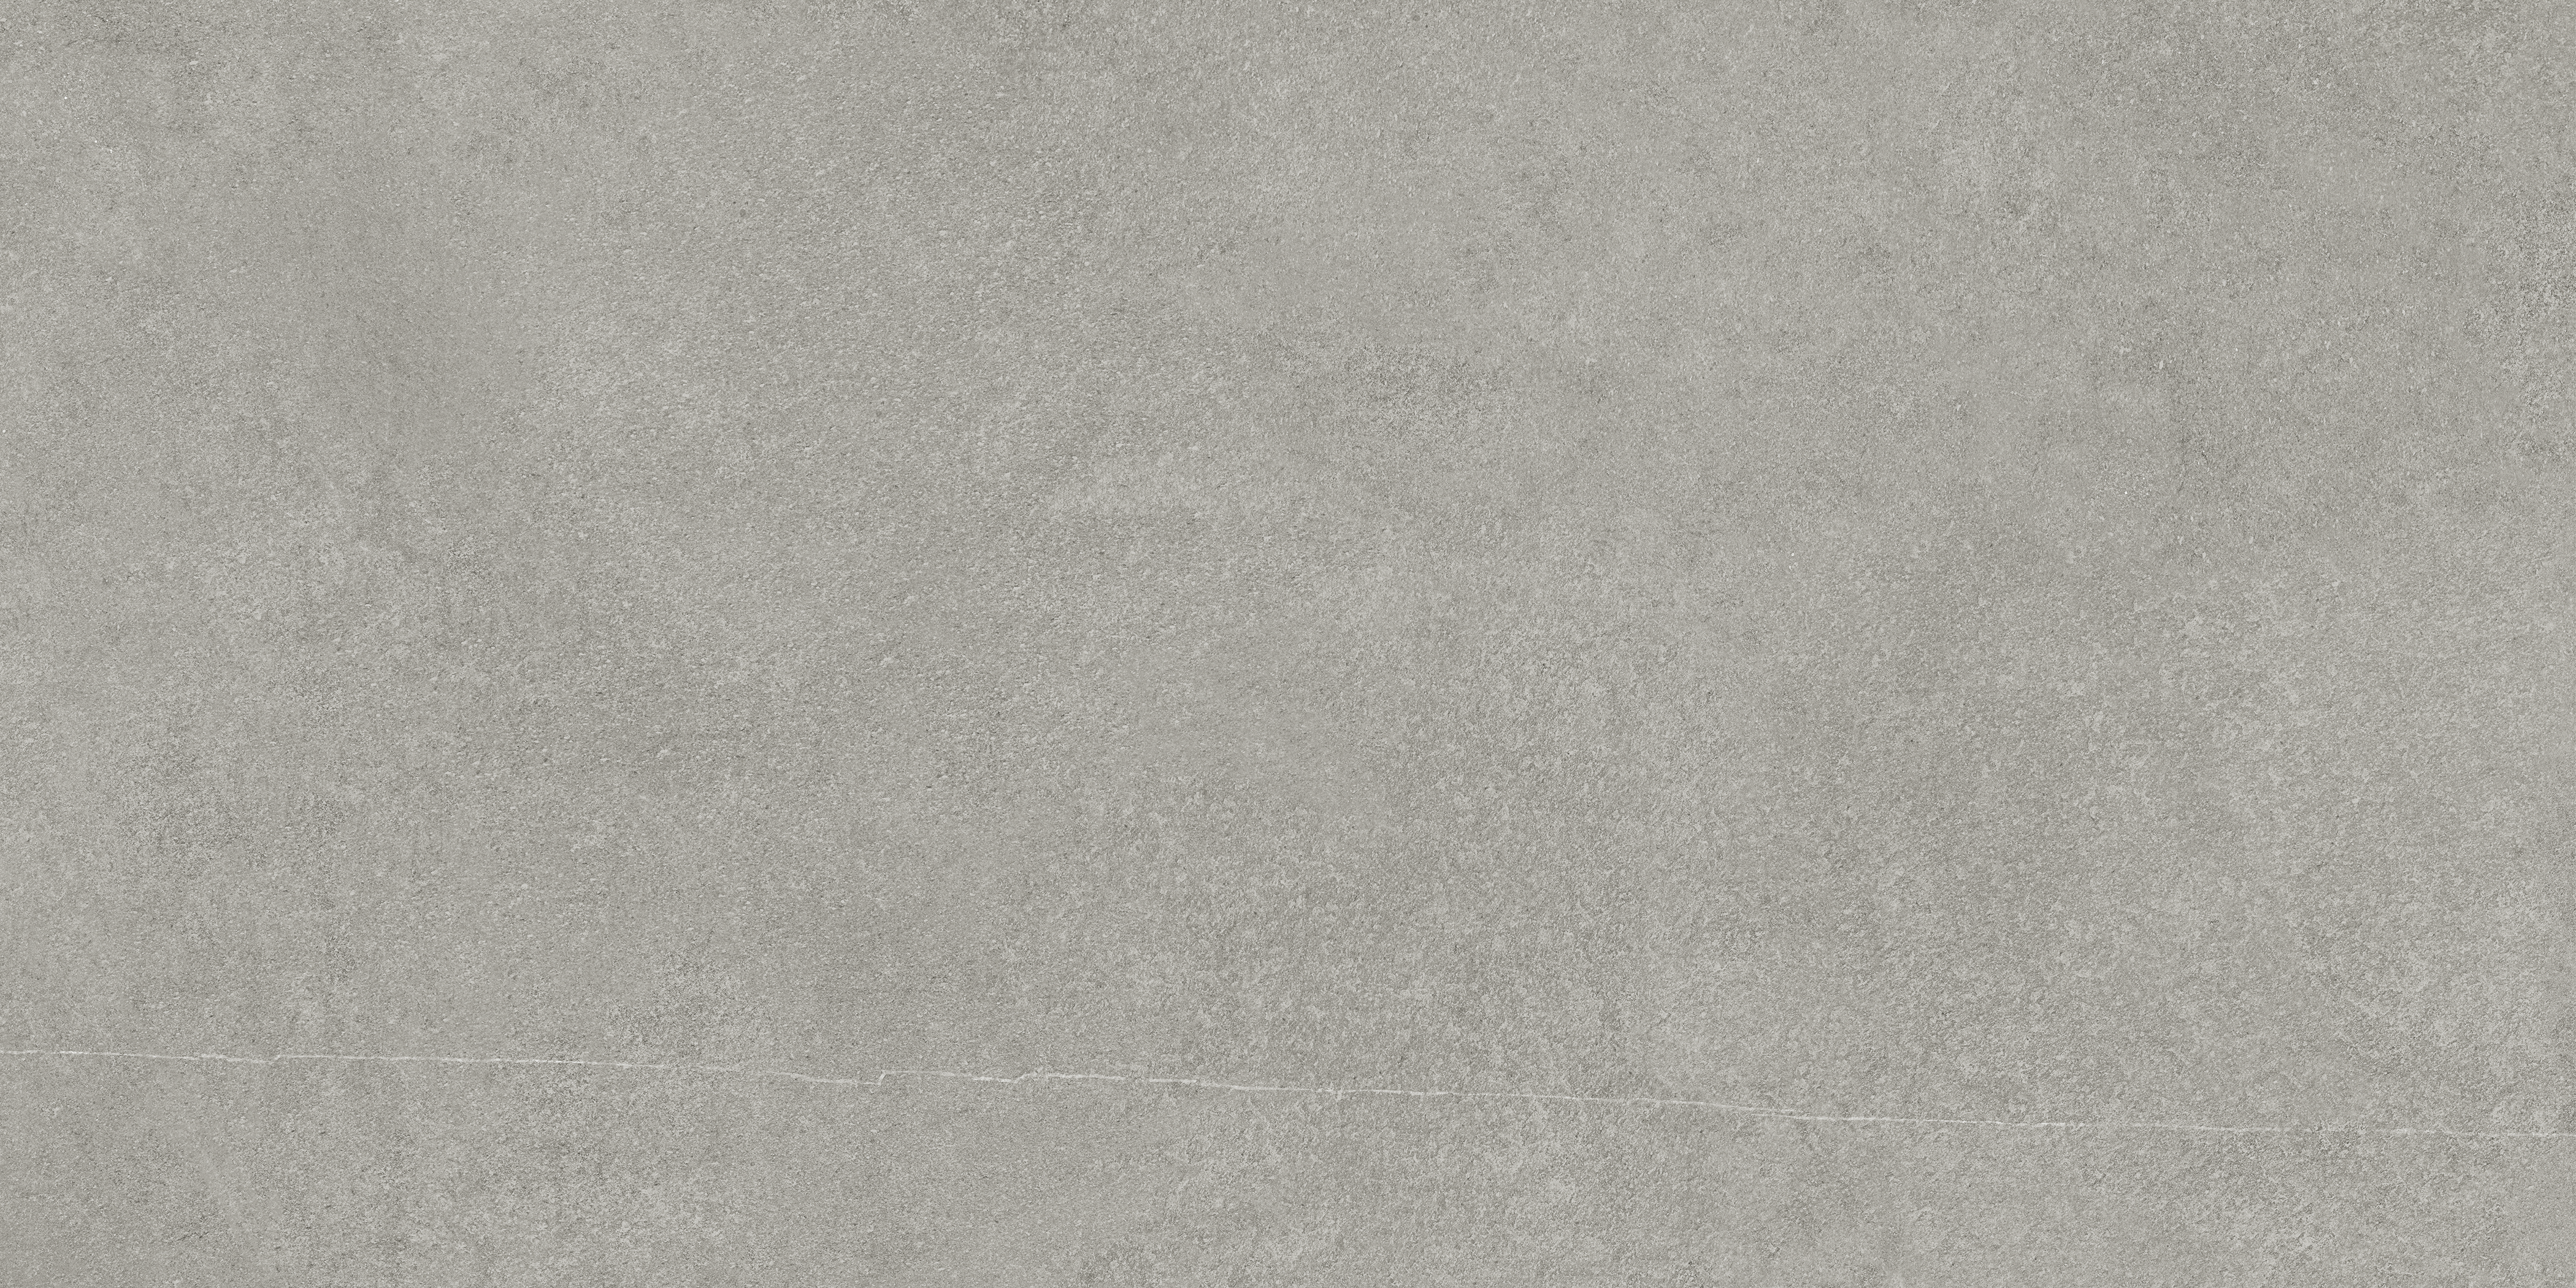 clay pattern color body porcelain field tile from mjork anatolia collection distributed by surface group international matte finish rectified edge 24x48 rectangle shape